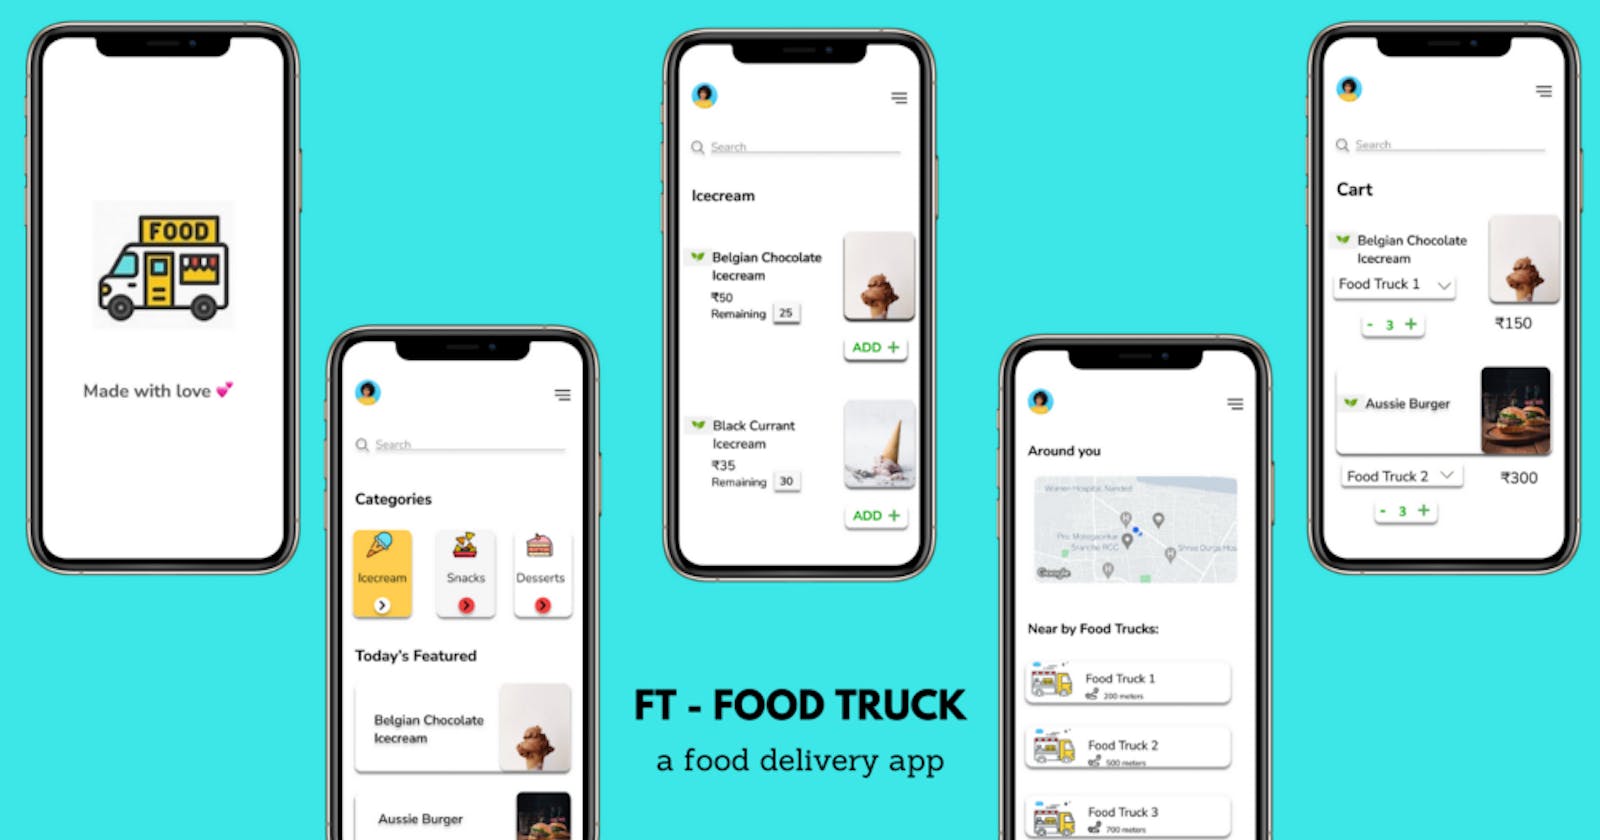 “FT -Food Truck” -a food delivery app (UI/UX case study)